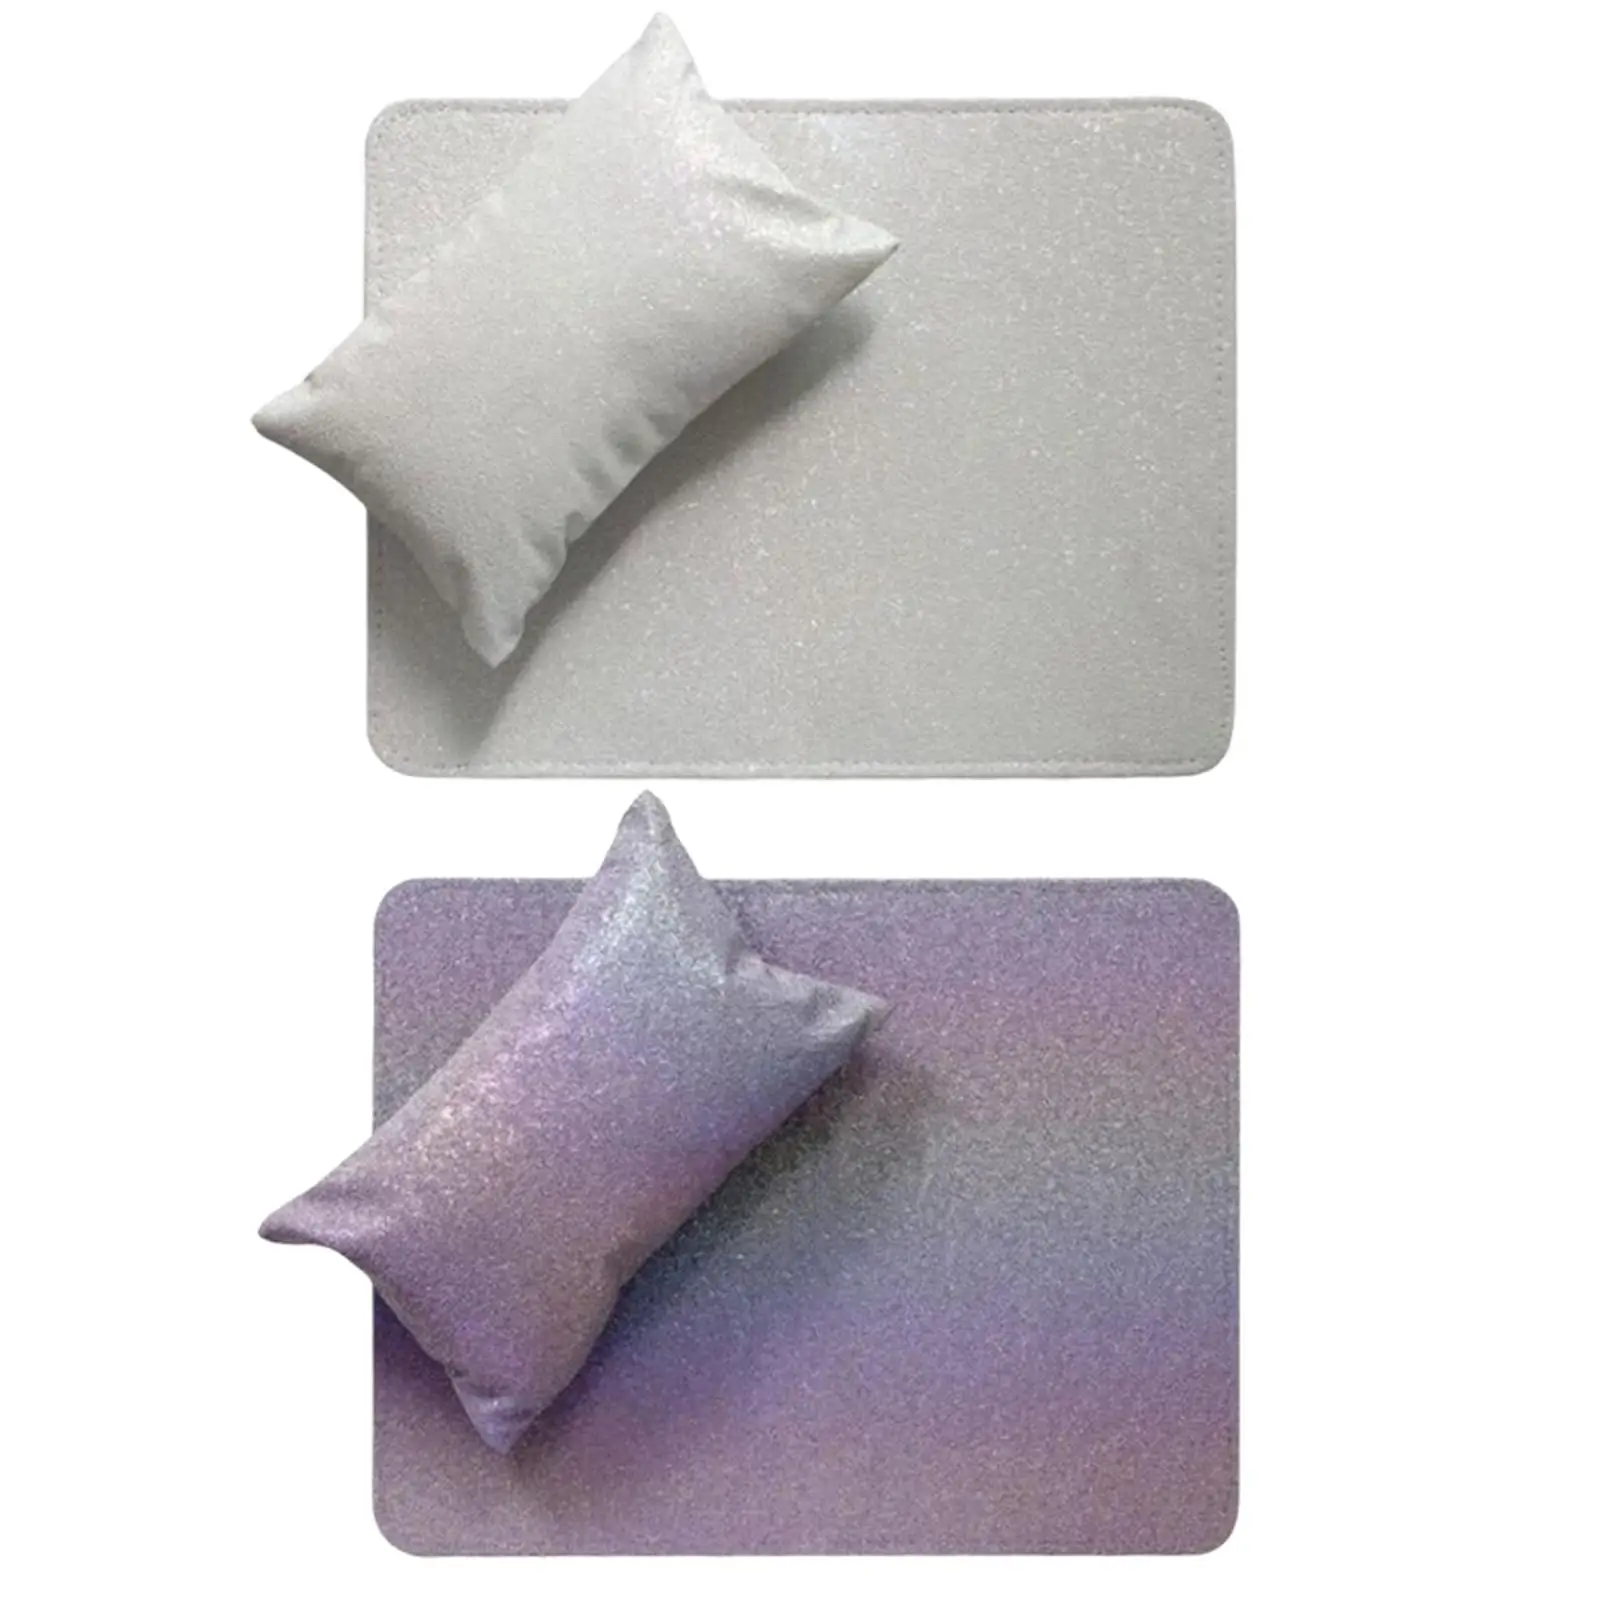 Nail Art Hand Set Arm Rest Pillow Table Pads for Manicure